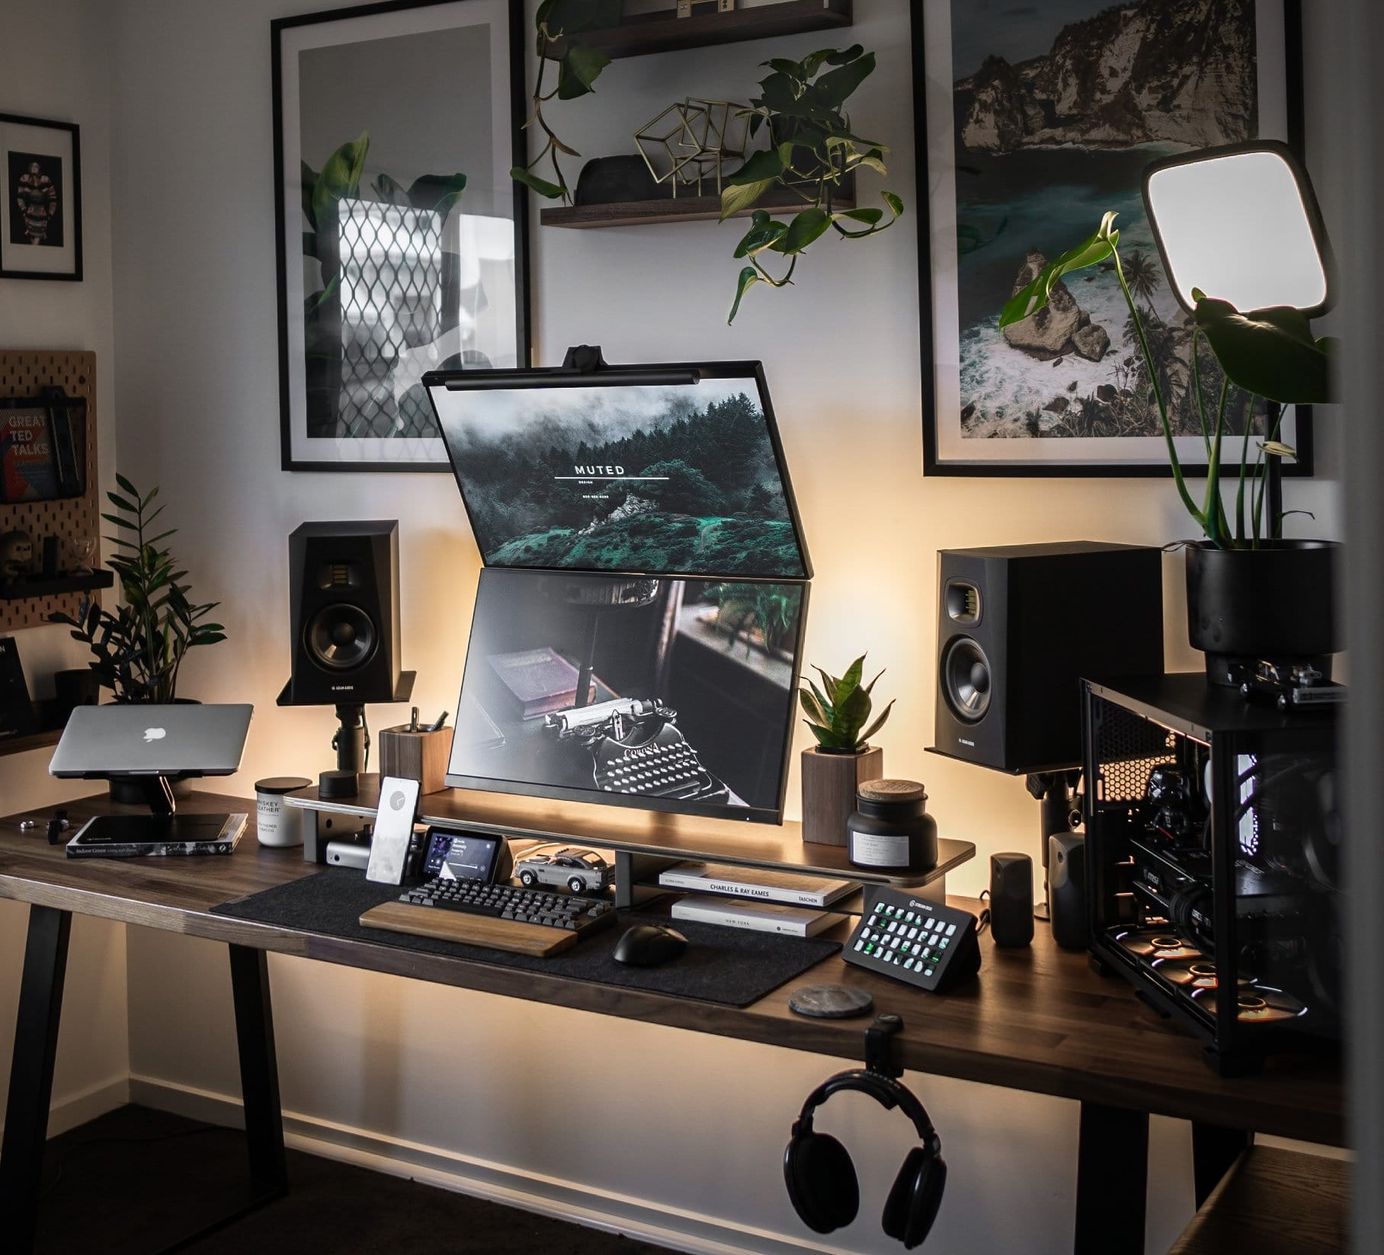 Inspiration for a home workspace set-up just for you - IKEA